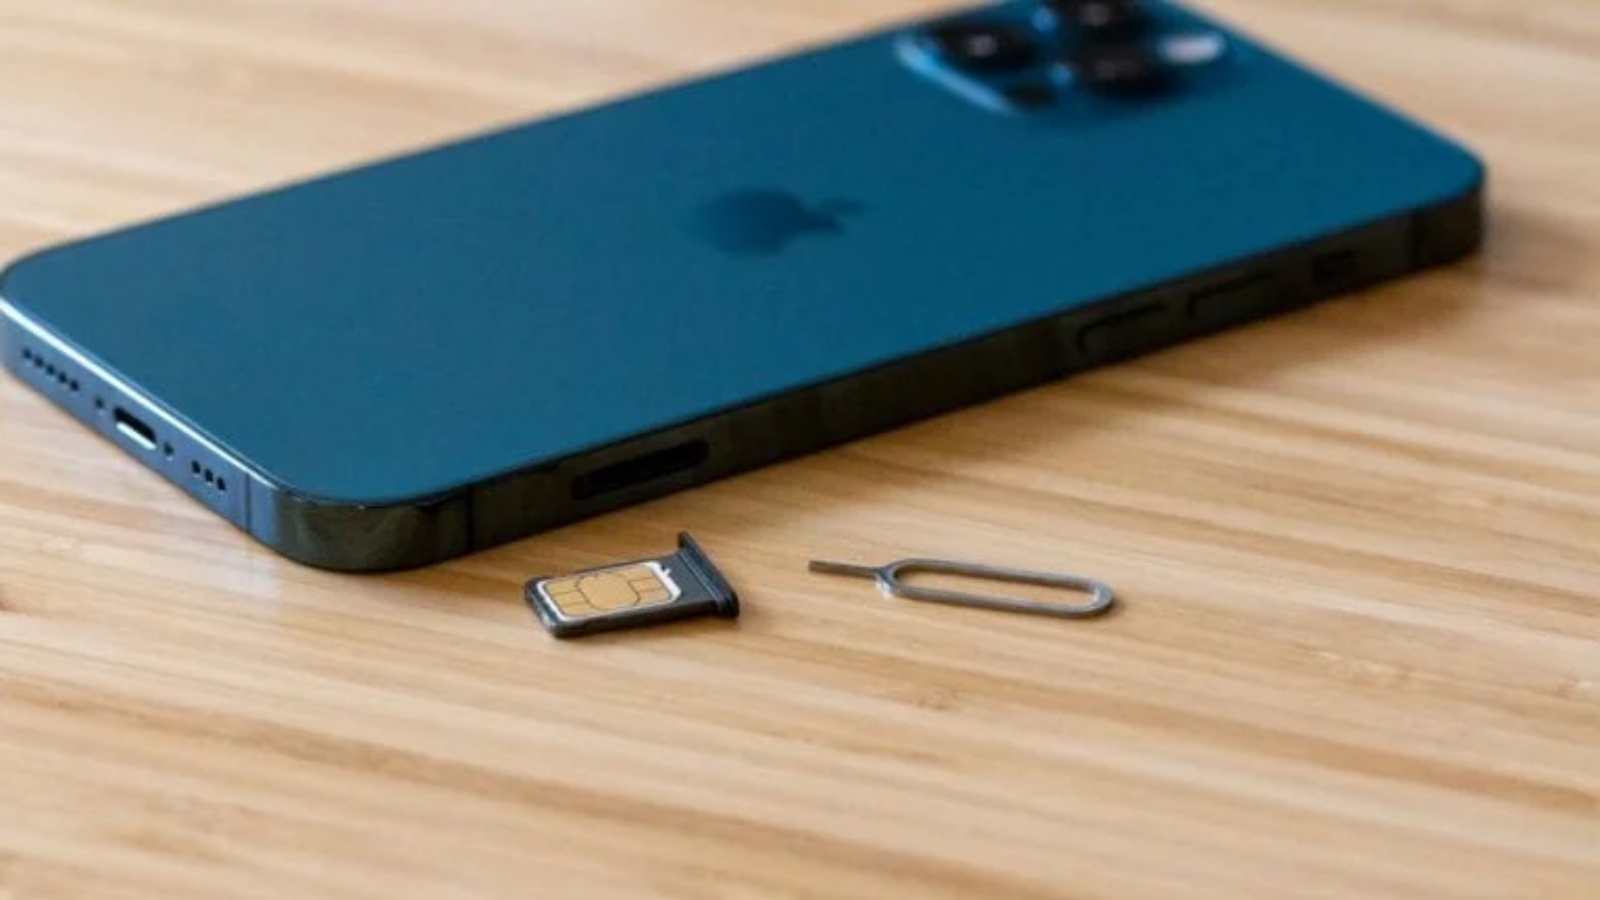 Opening The SIM Card Slot On IPhone: A Step-by-Step Guide